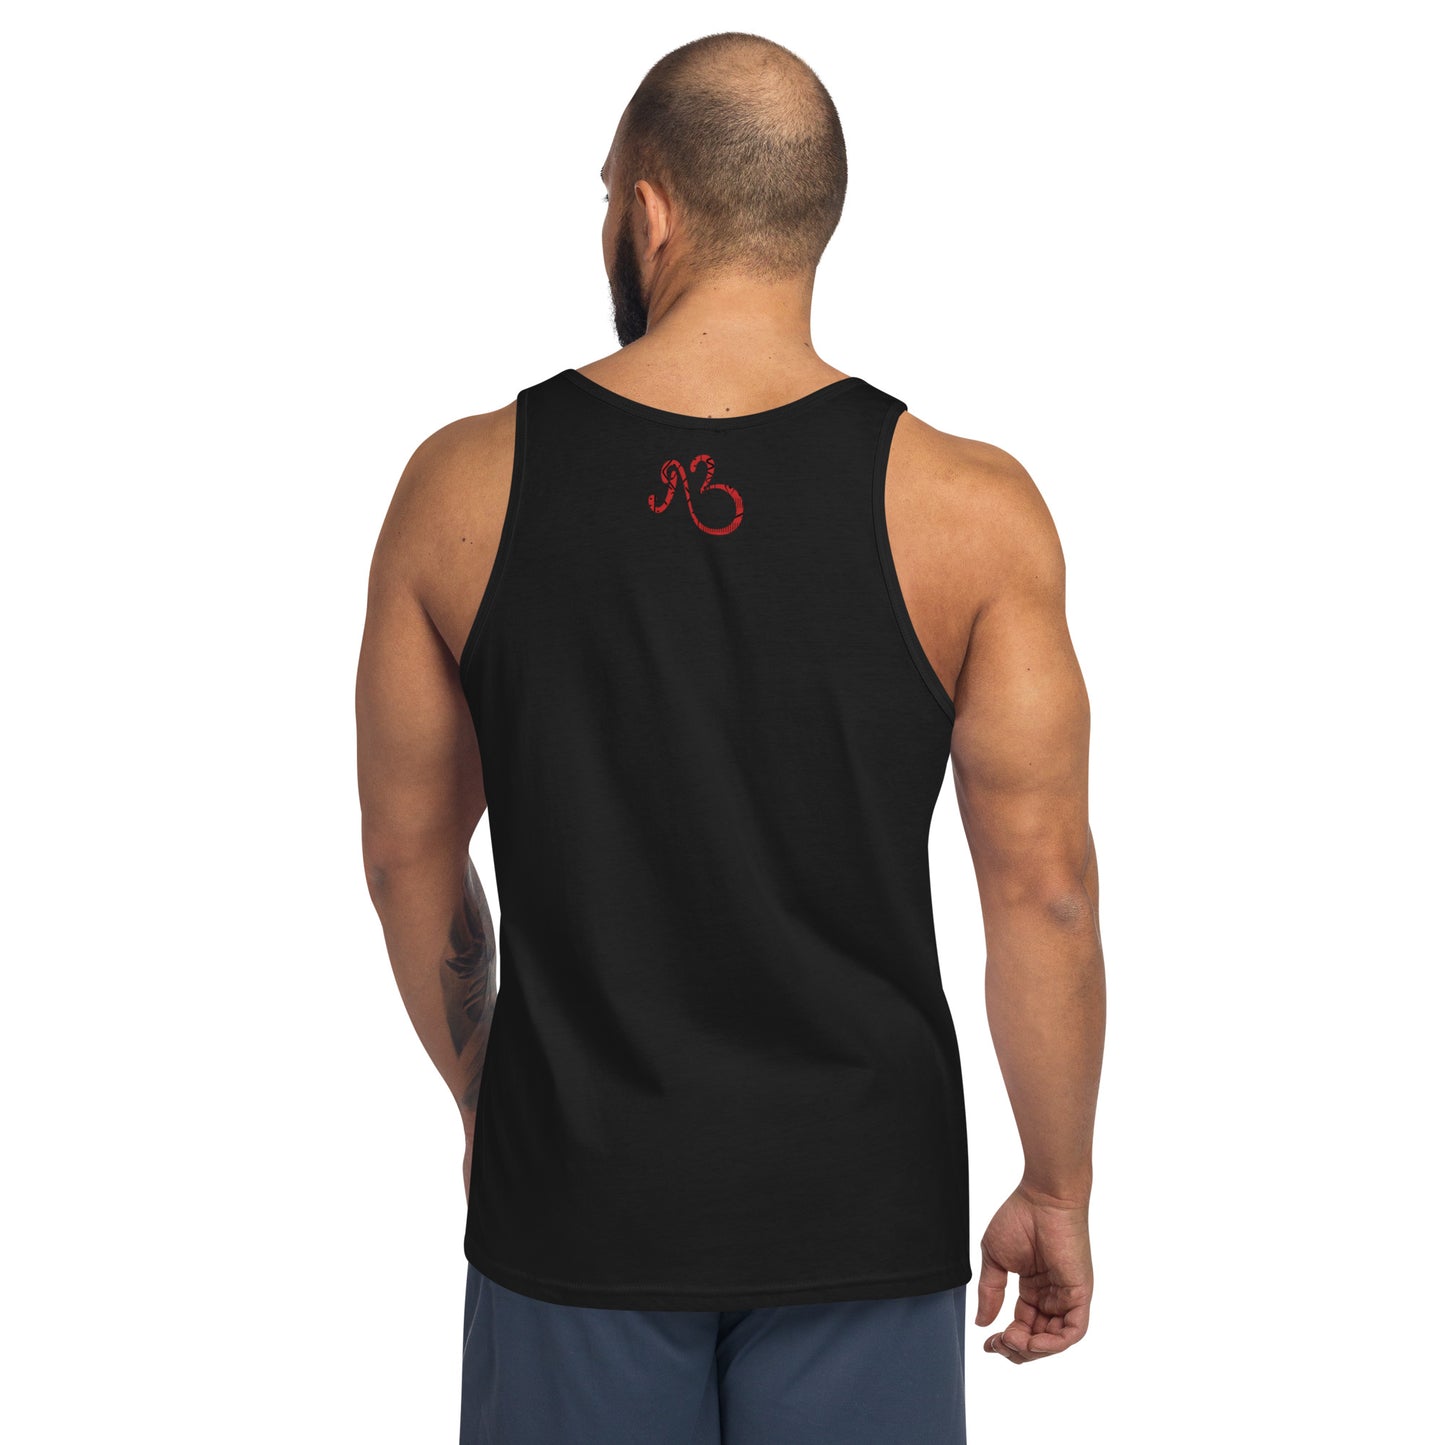 Smiley Gym Quote Unisex Tank Top - Good Workout